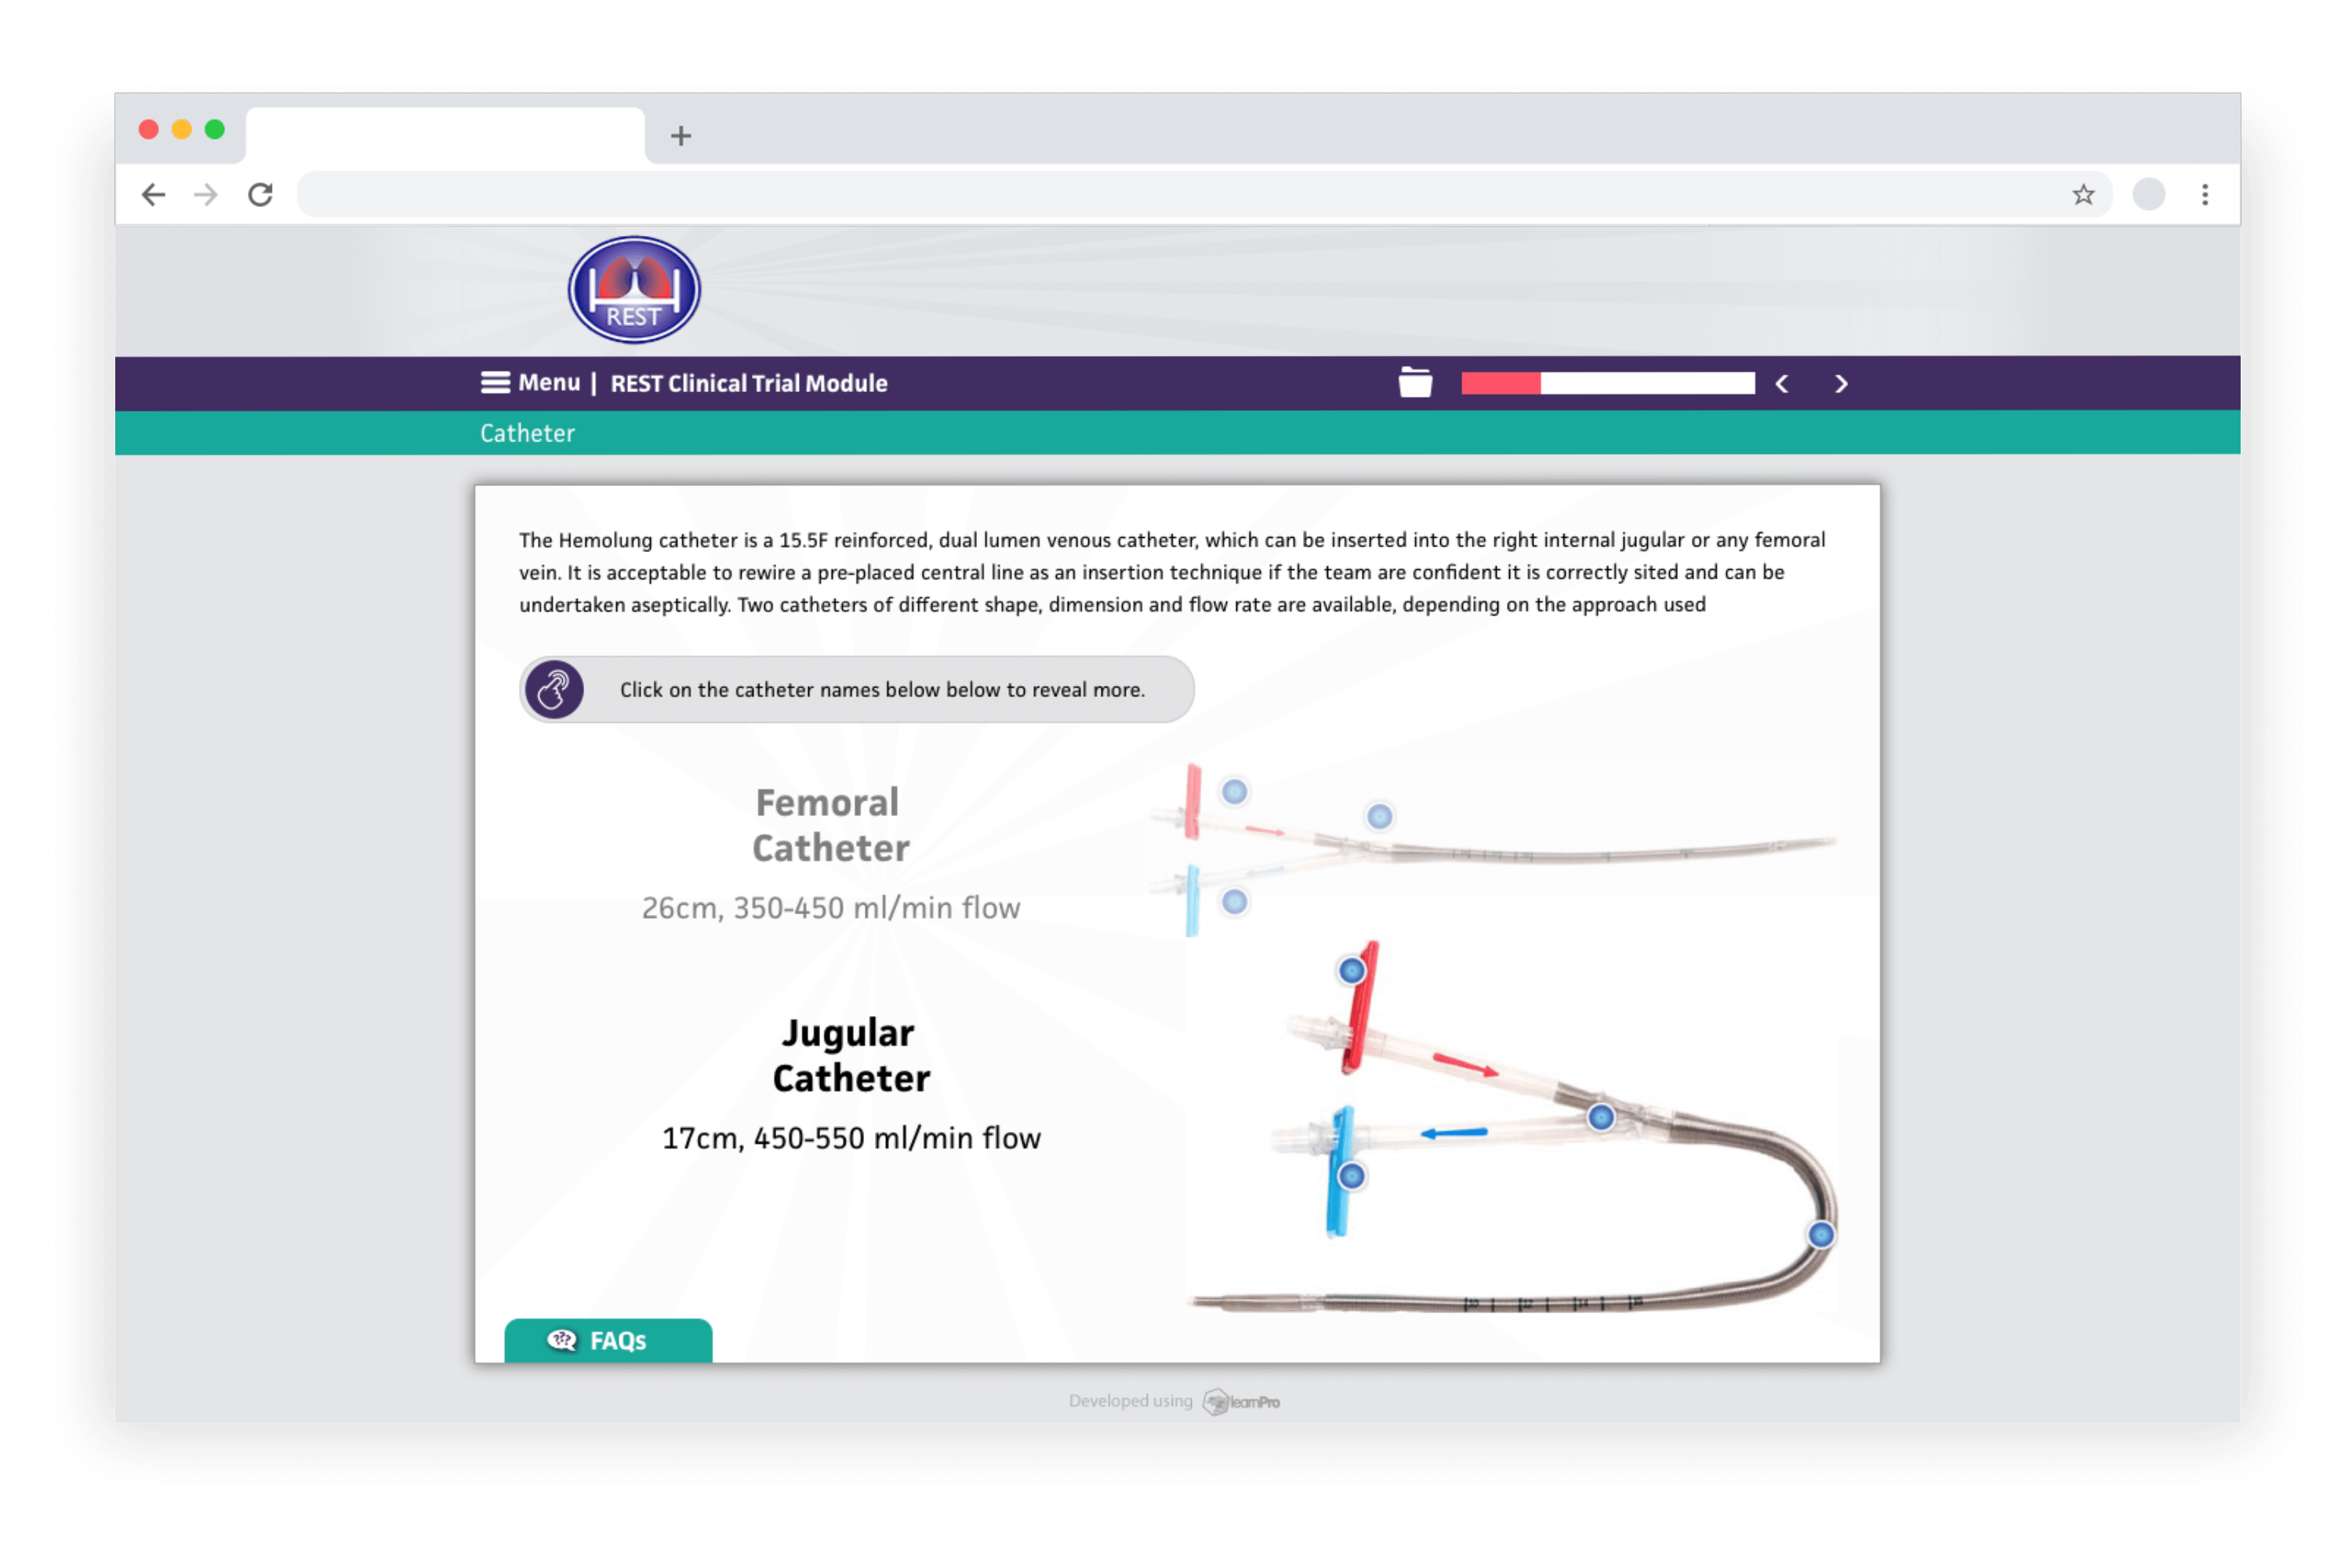 Example e-learning showing a REST Clinical Trial course developed in LAB Advanced